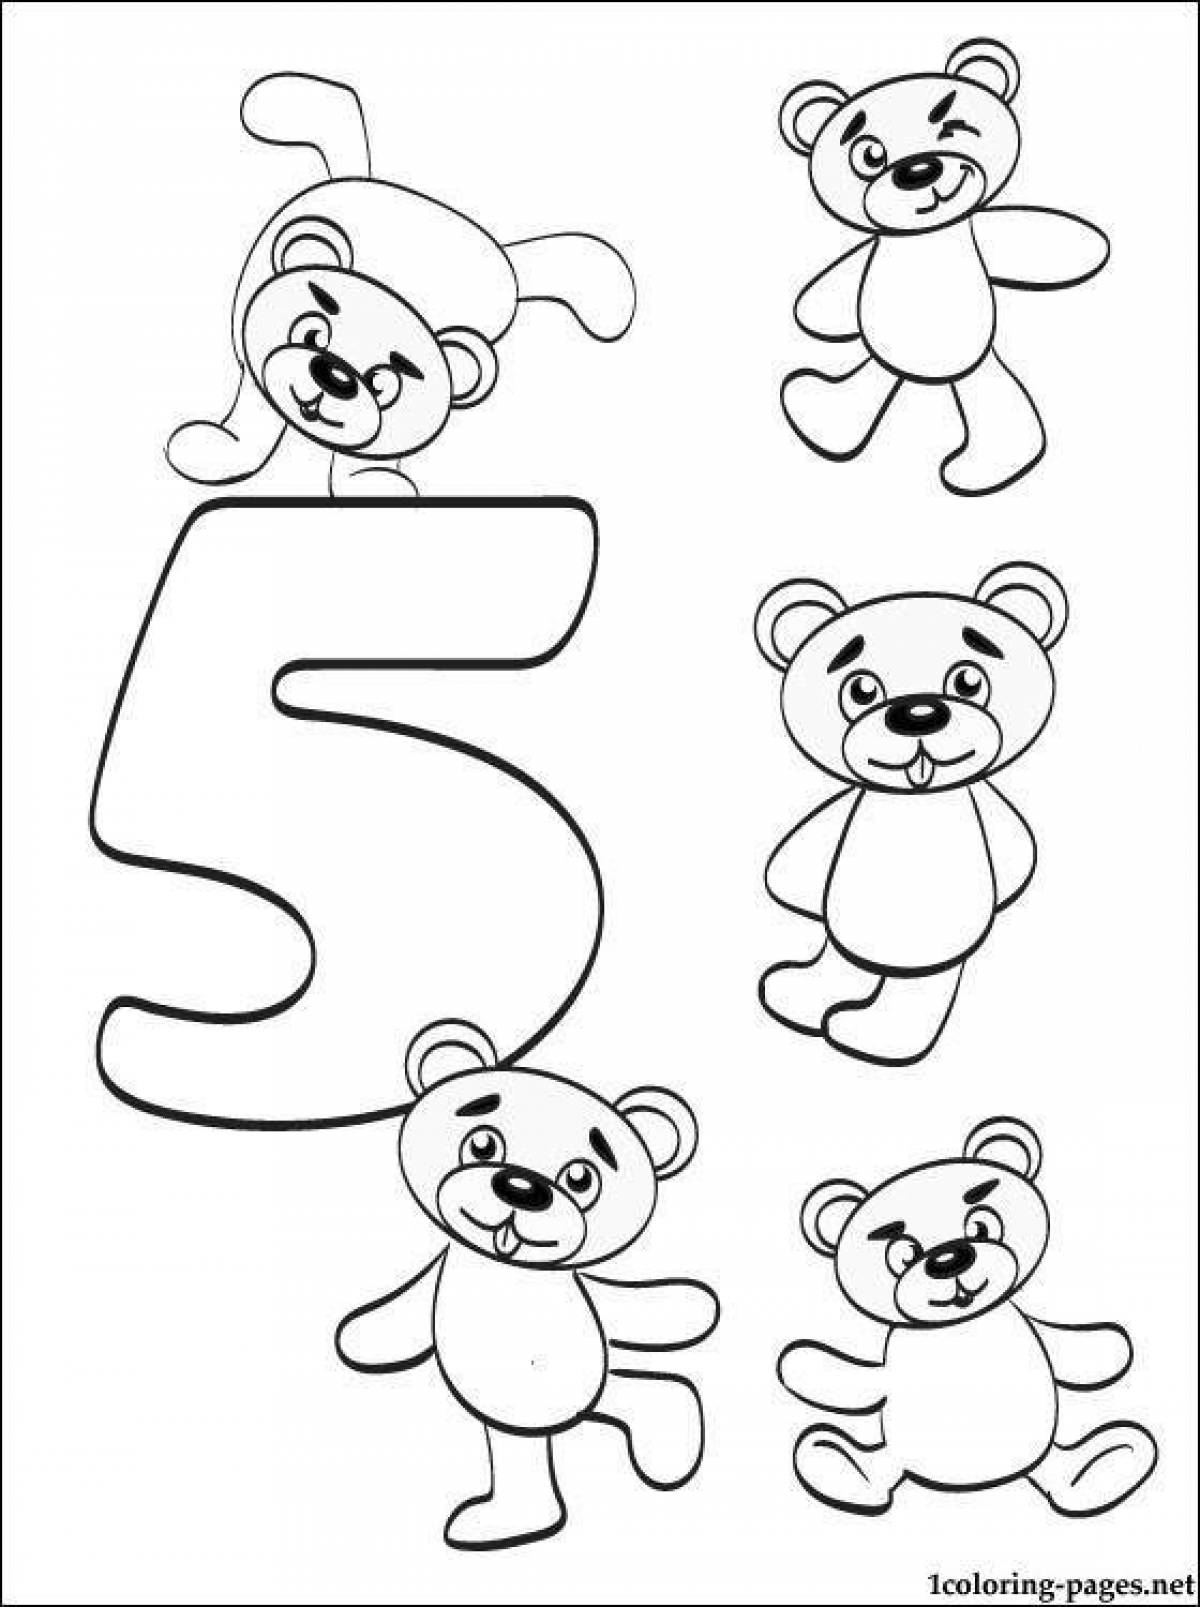 Live coloring page 5